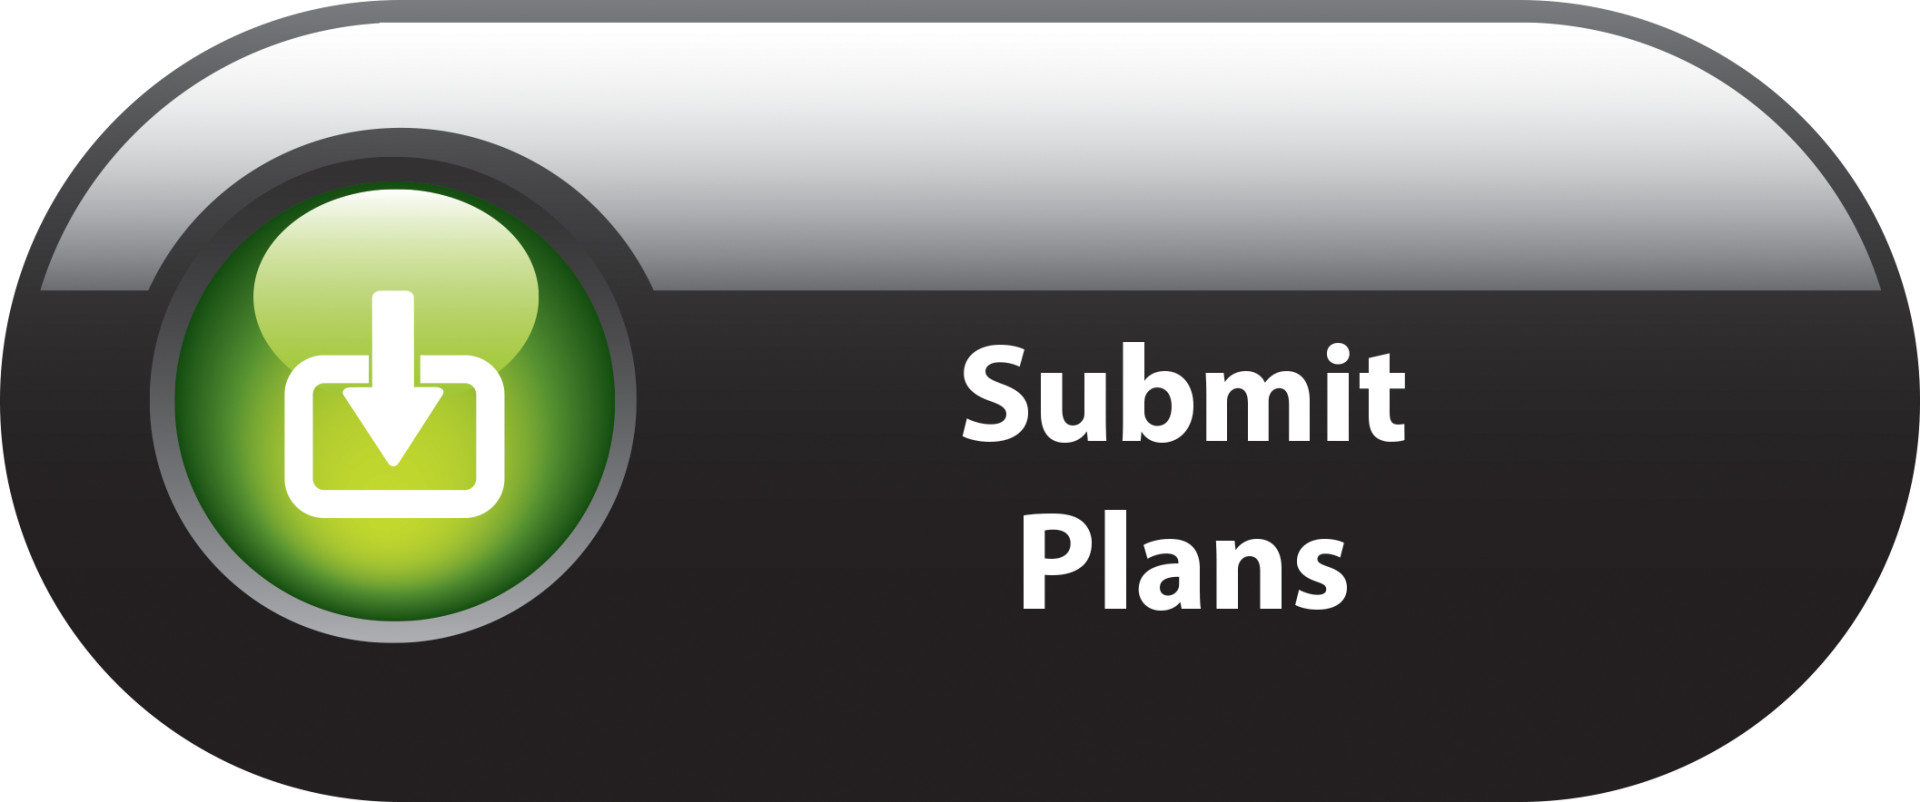 Submit Plans